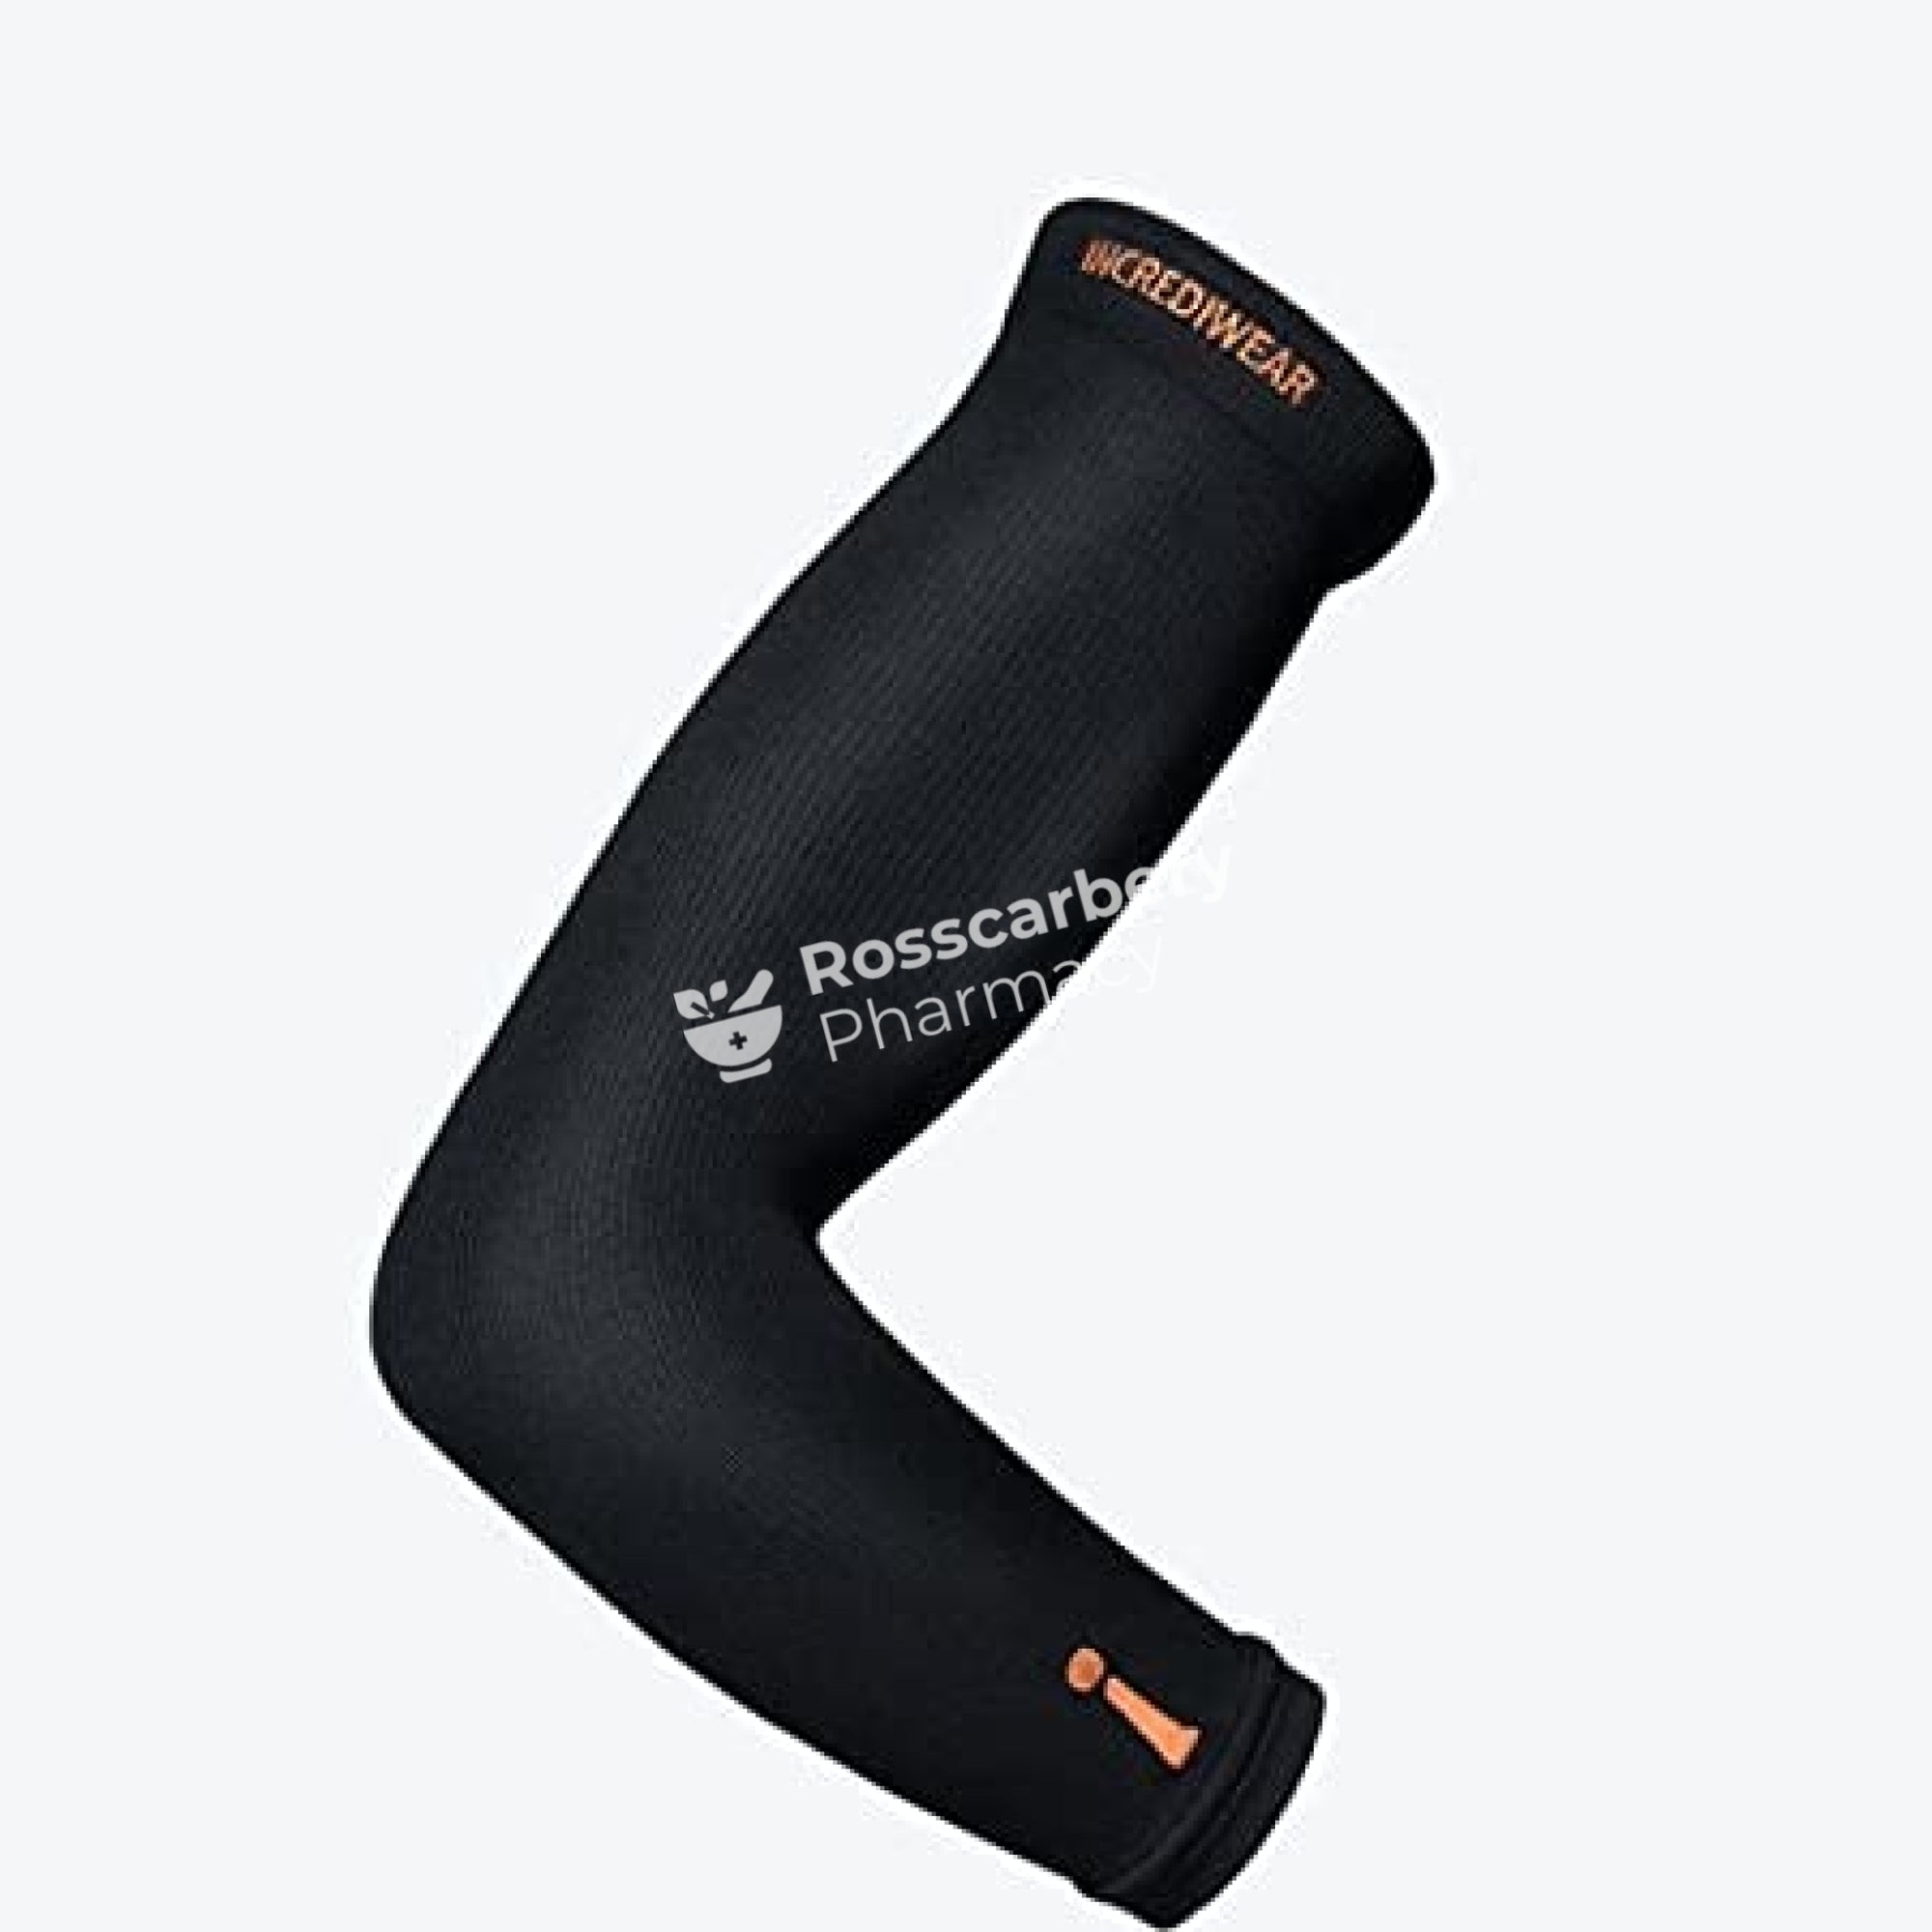 Incrediwear Active Recovery Arm Sleeve - Black Supports & Compression Hoisery